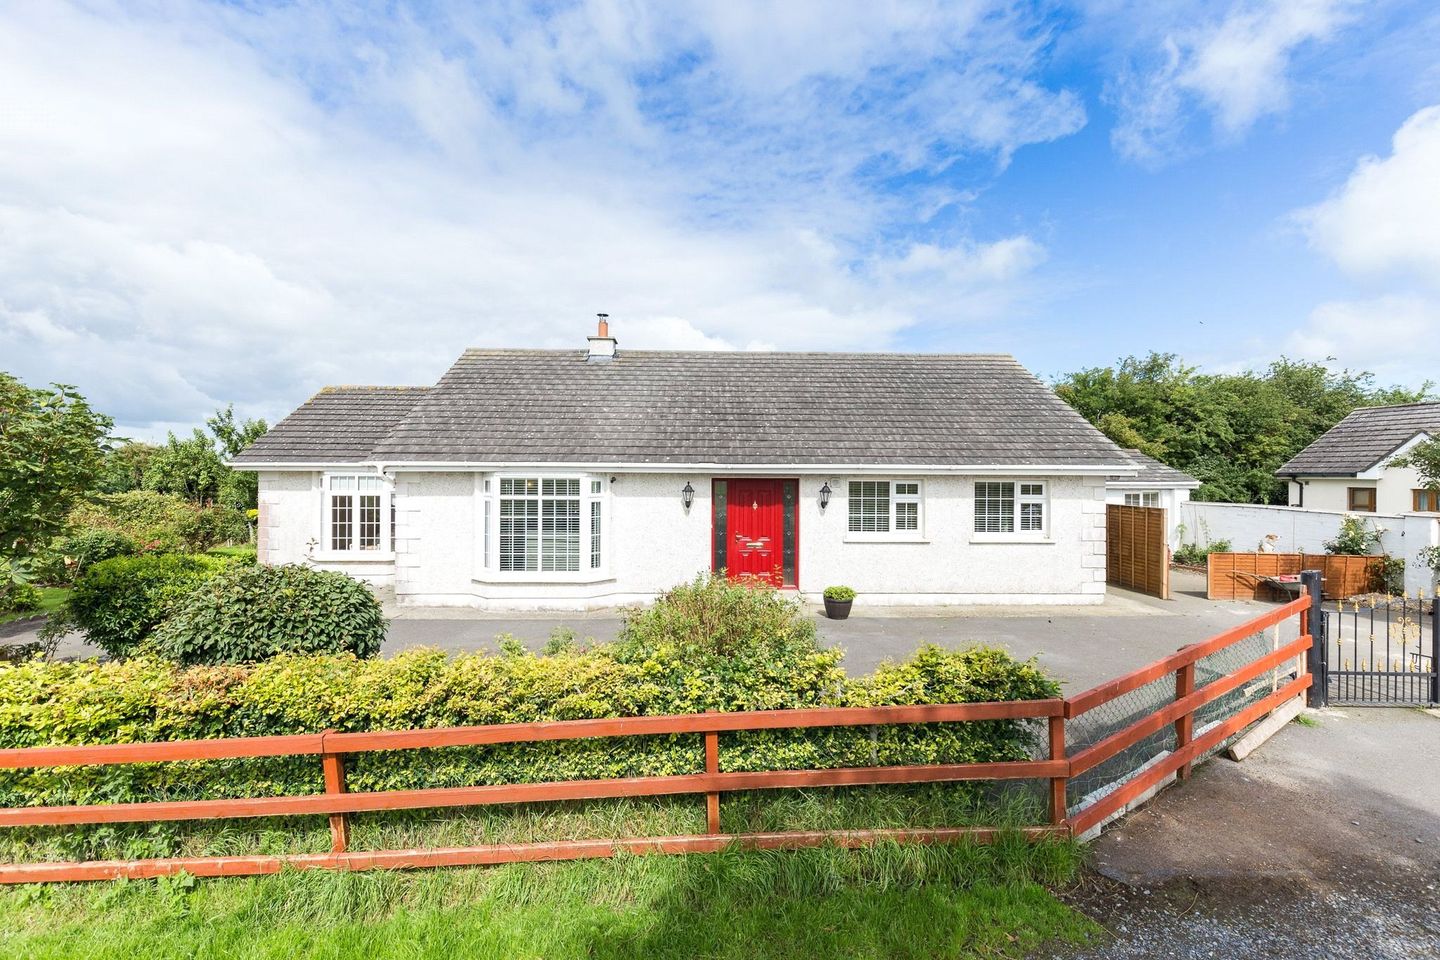 Yew Tree House, Commons North, Suncroft, The Curragh, Co. Kildare, R56FX45